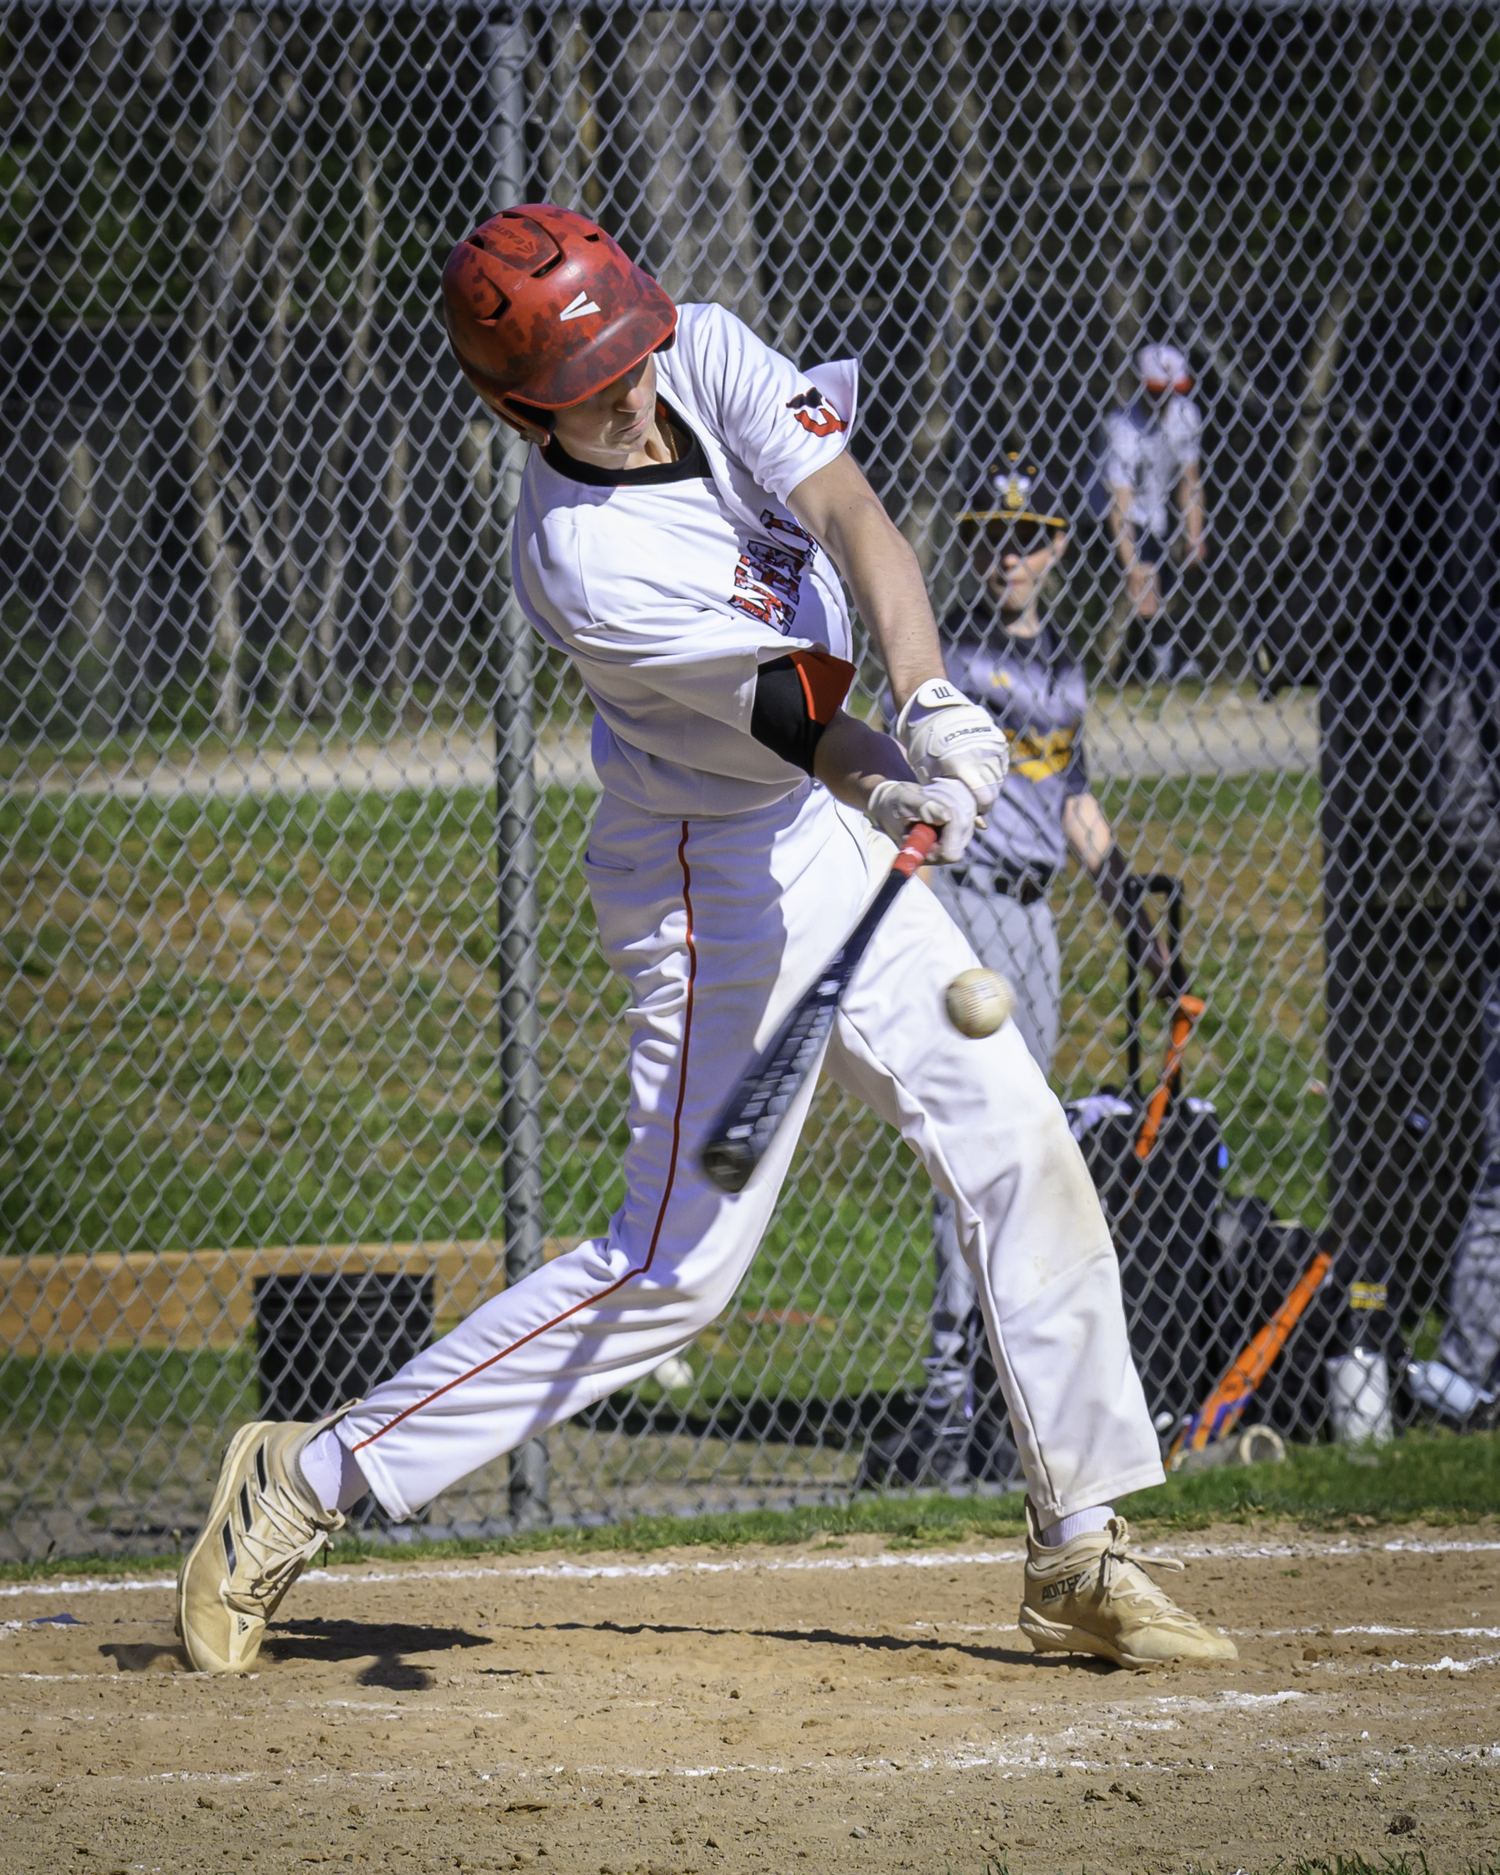 Braeden Mott included himself in the hit parade that the Whalers had in game two of the series with the Bees on May 1. They scored 17 runs on 20 hits.   MAIRANNE BARNETT